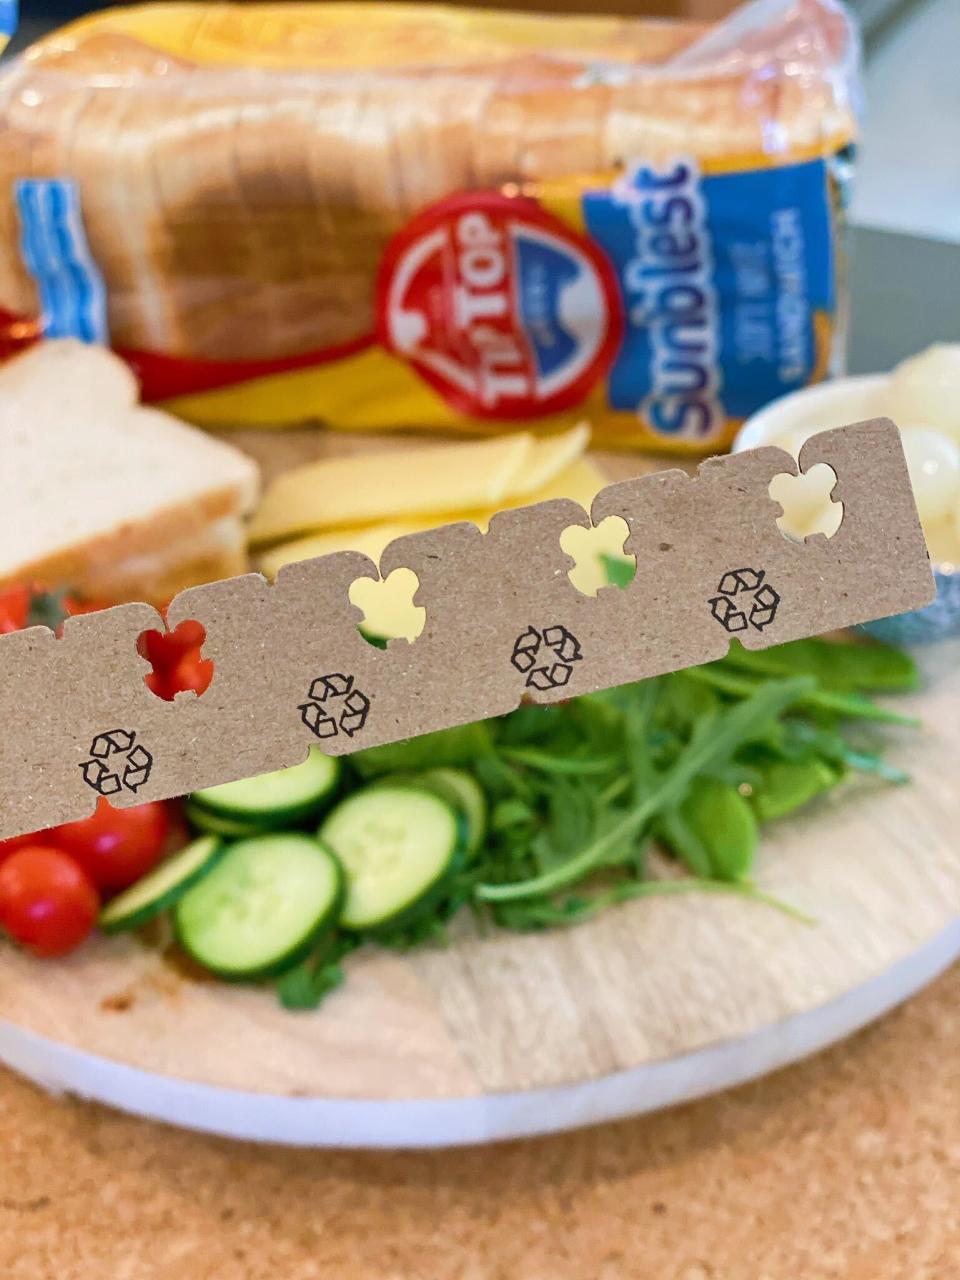 Image of Tip Top aussie bread brand new cardboard recyclable bread tags replacing plastic